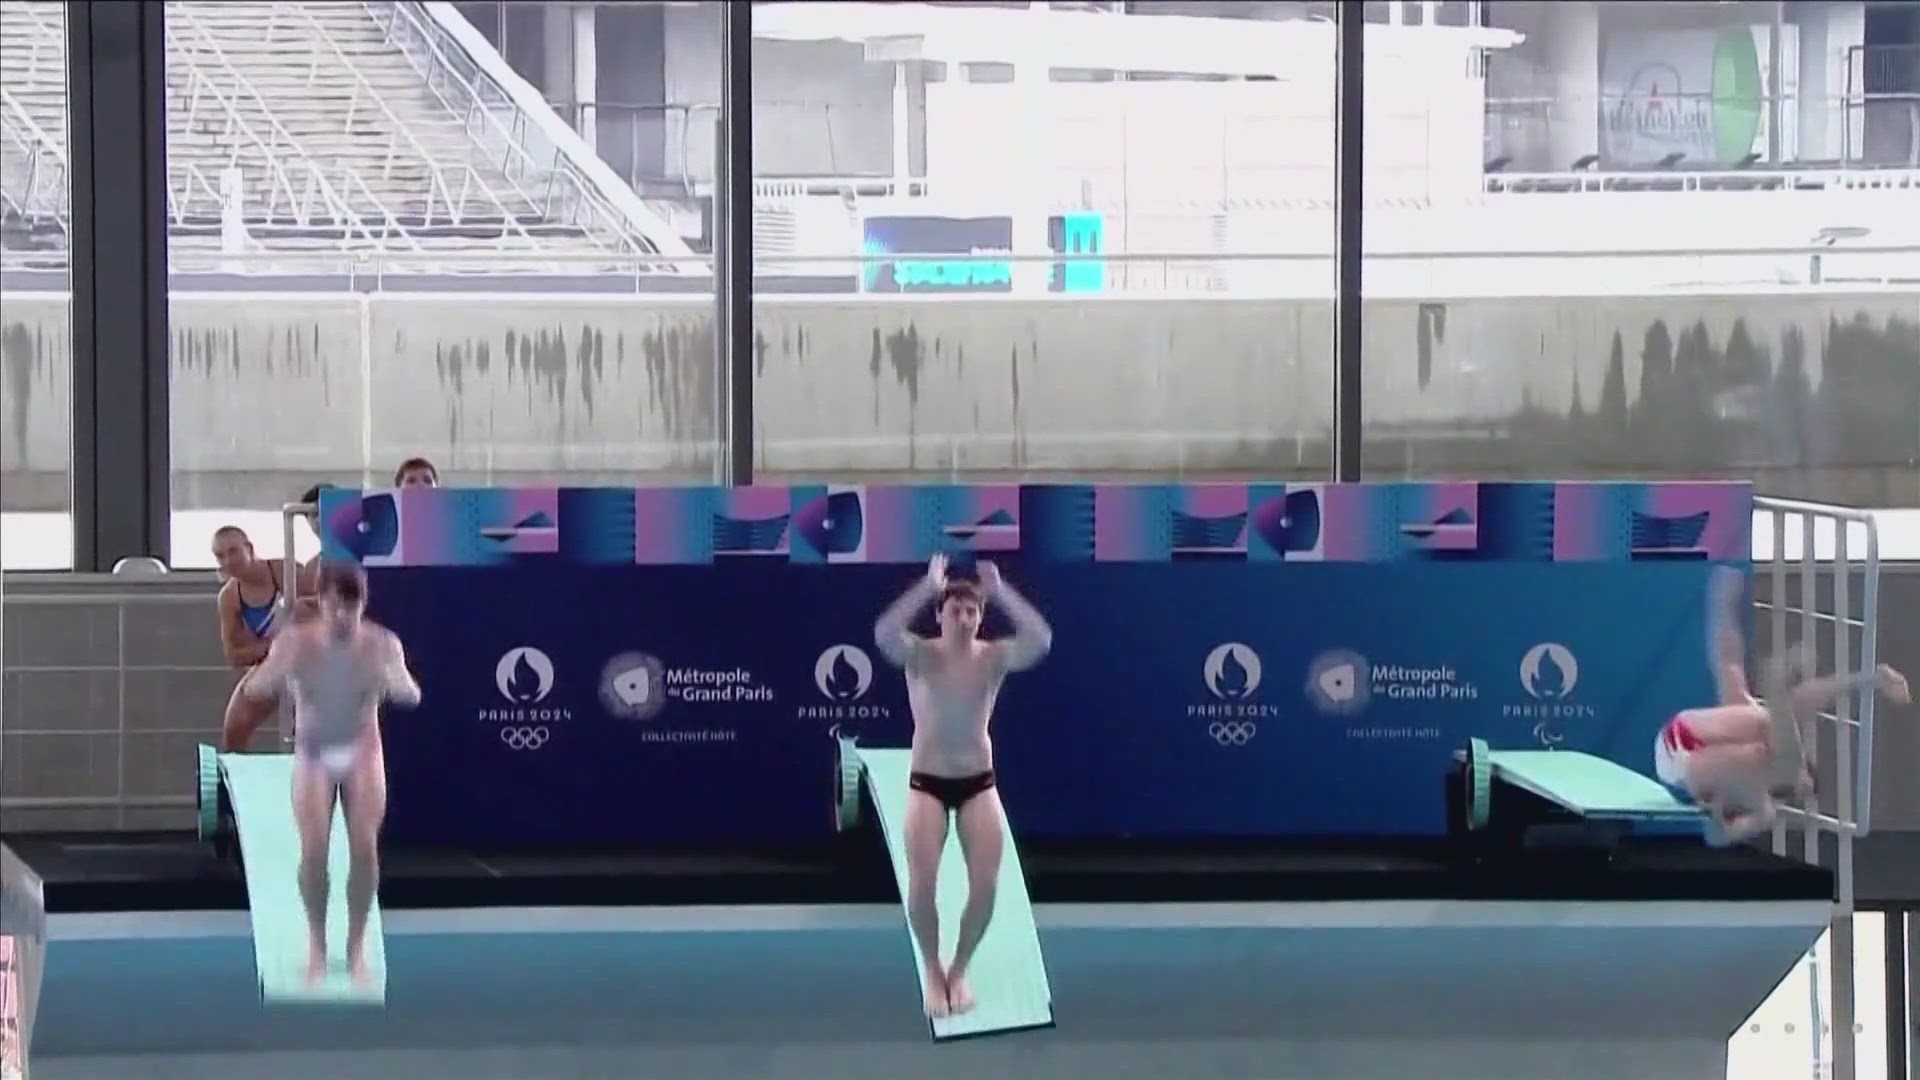 An elite diver made an embarrassing splash at the opening ceremony for a prized Olympic venue.